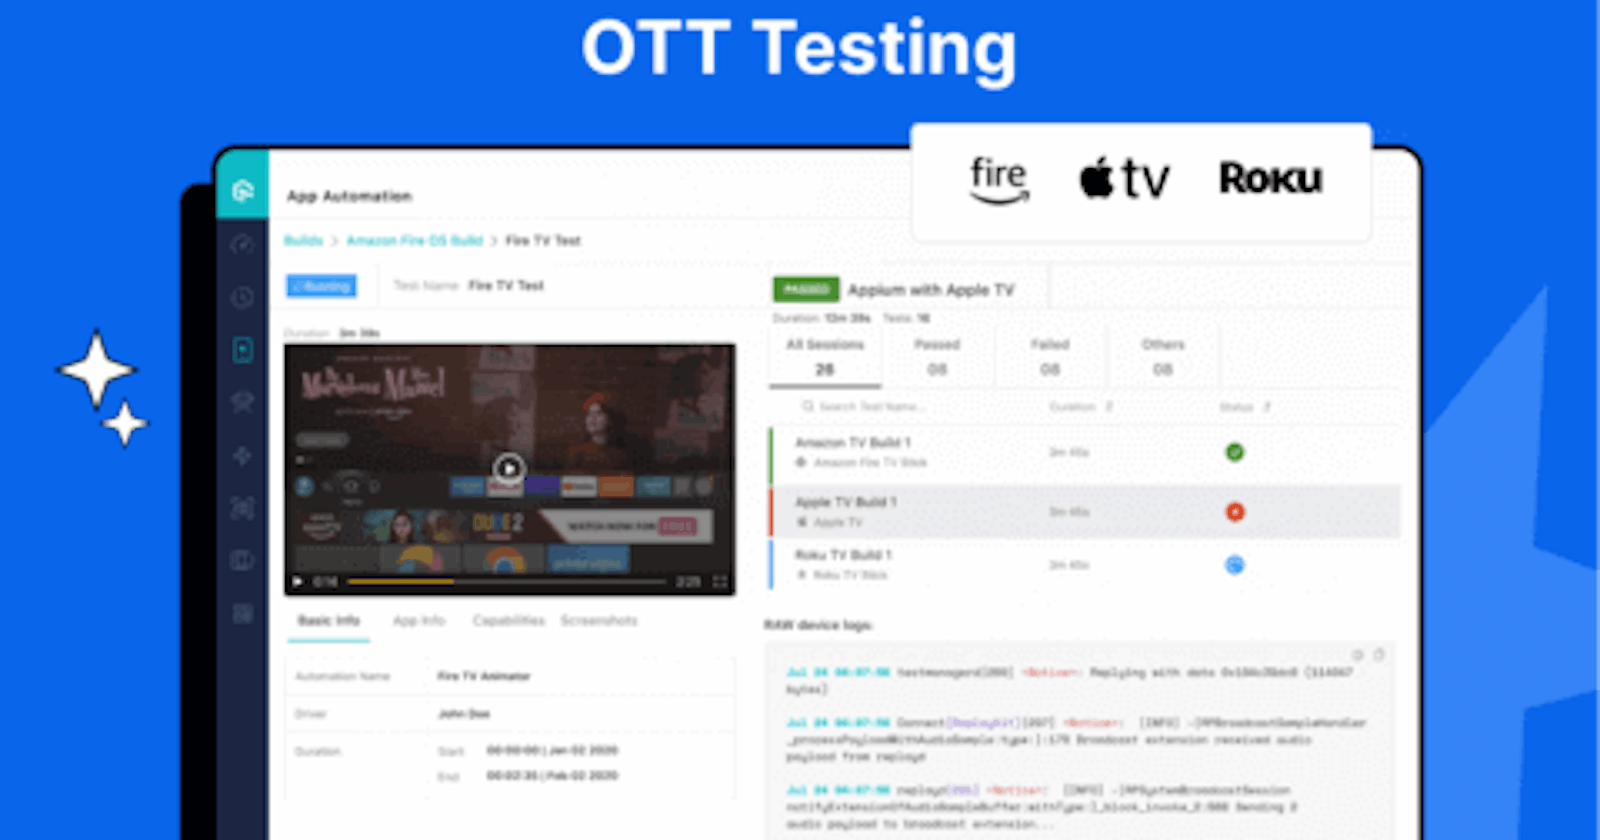 LIVE With Automation Testing For OTT Streaming Devices 📺